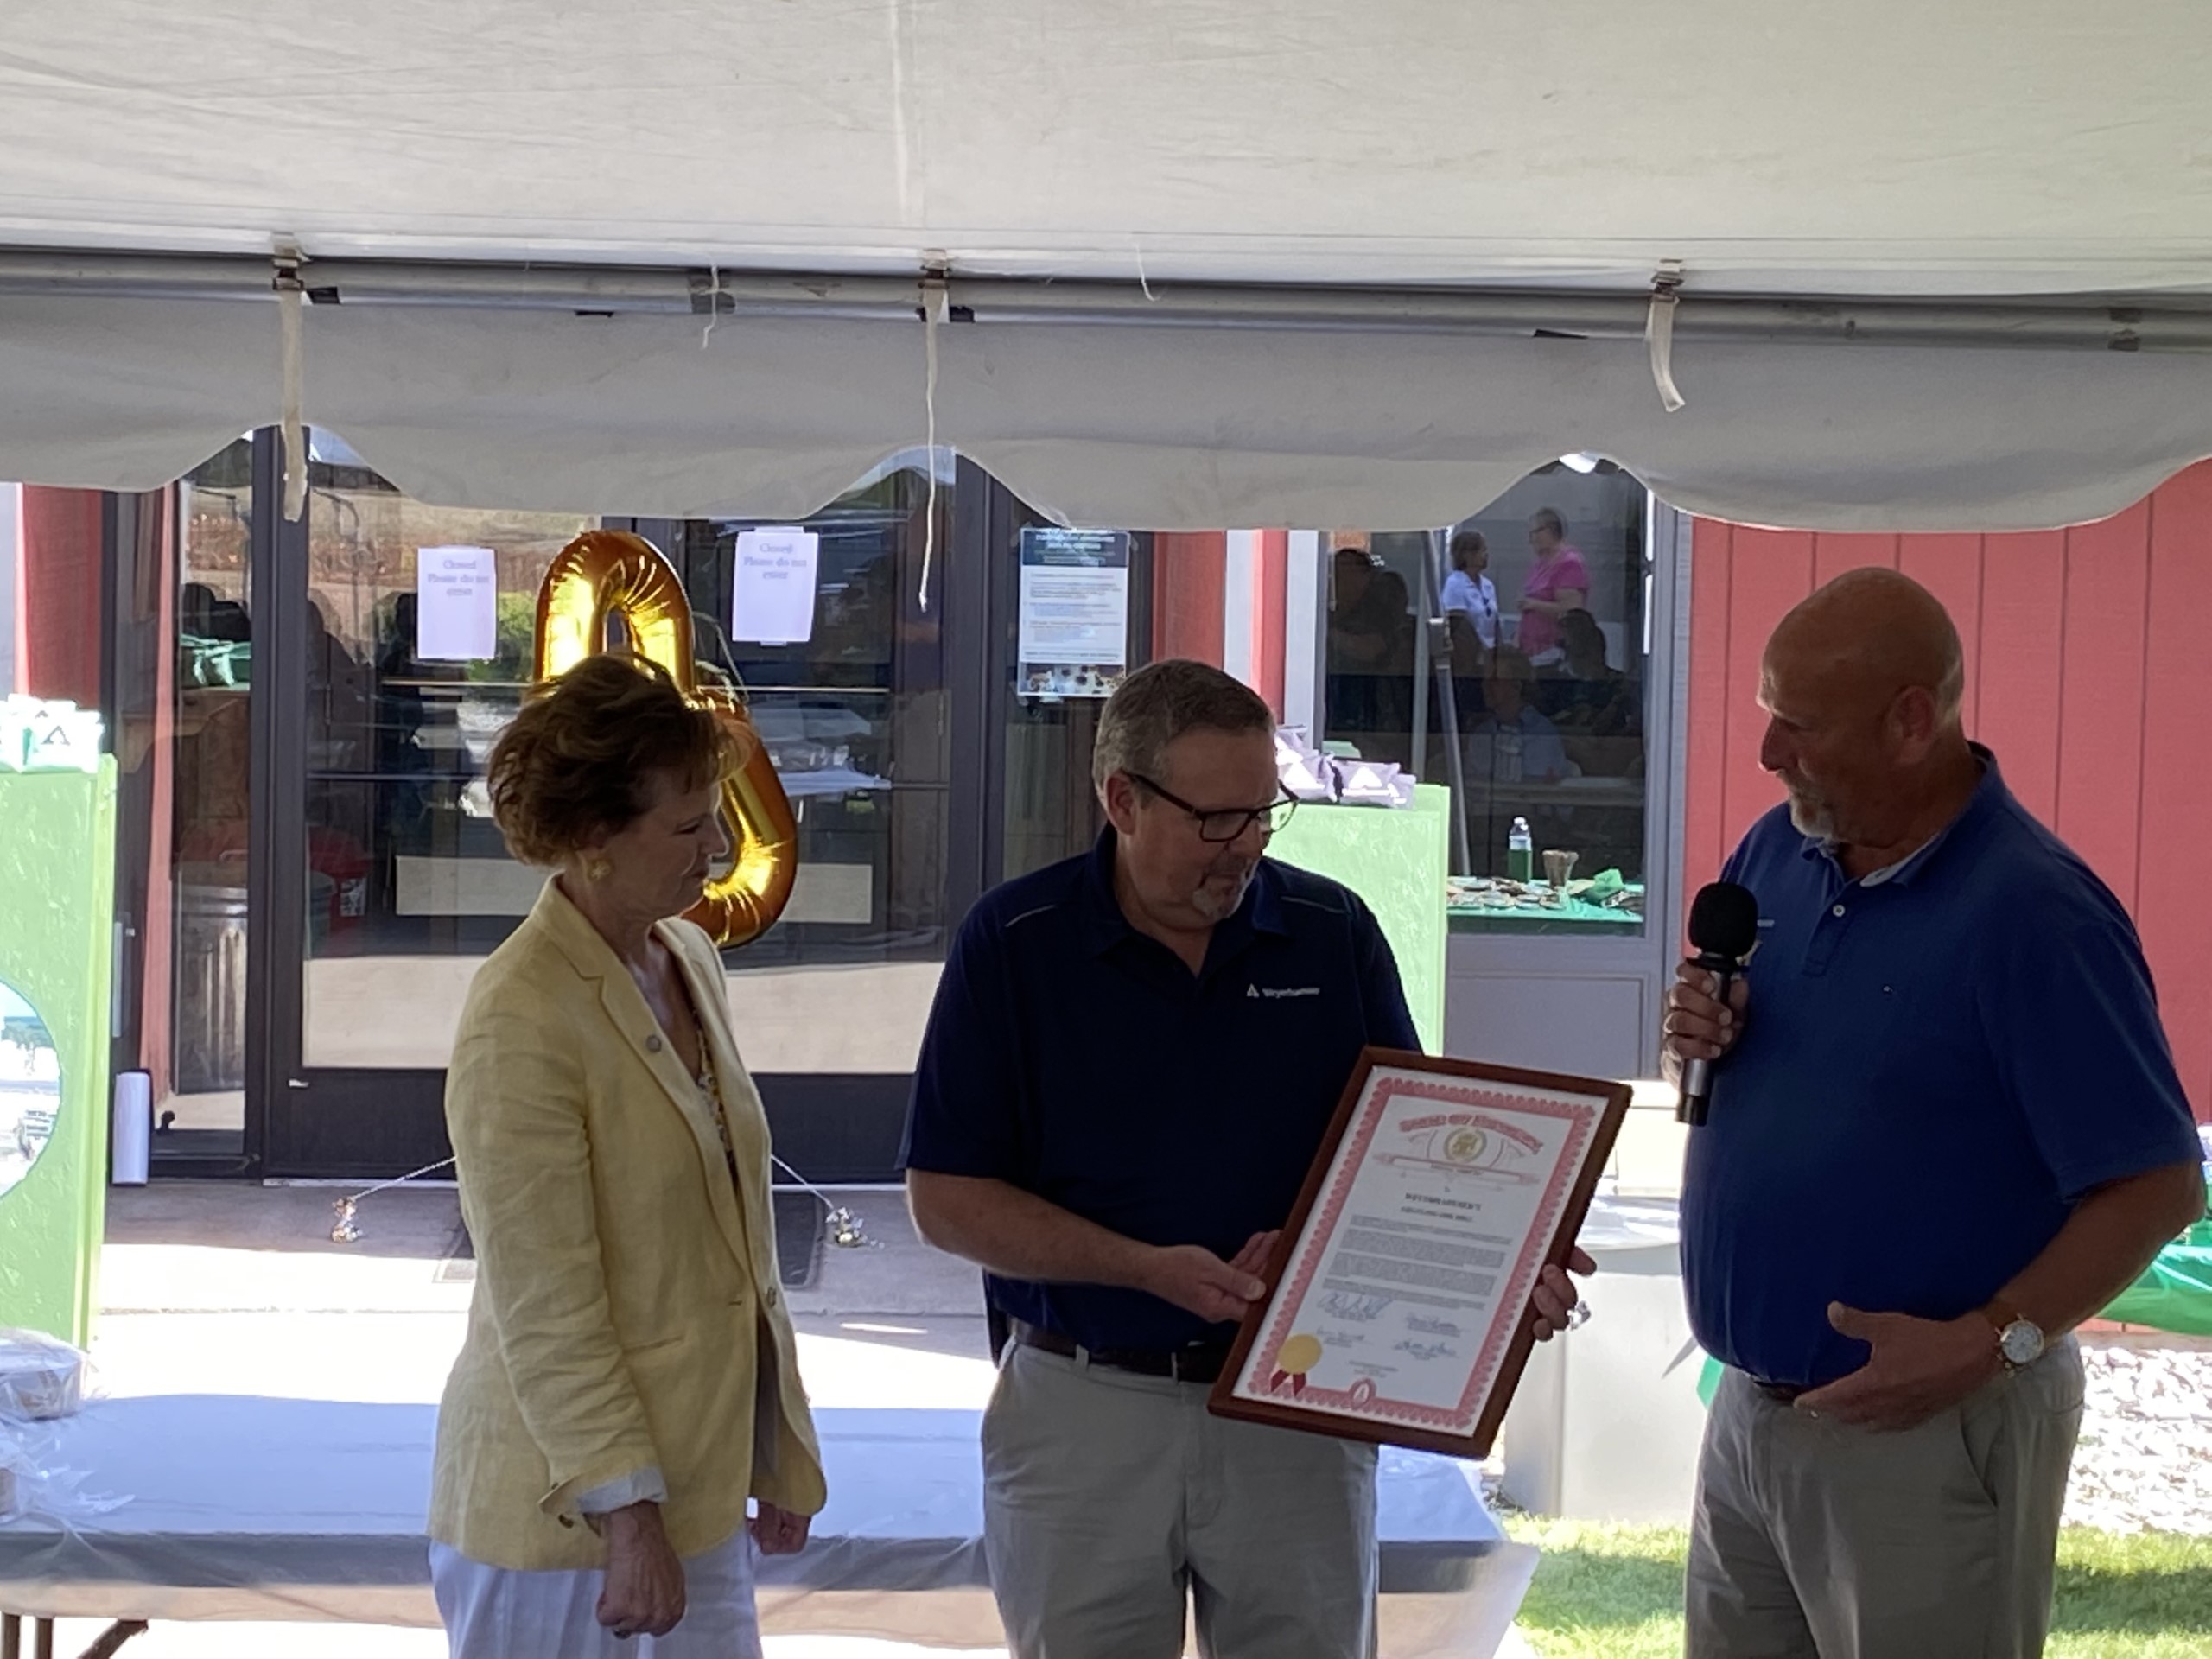 State Rep. Dare Rendon (left) and State Sen. Curt VanderWall (right) present a Tribute certificate to Bruce.